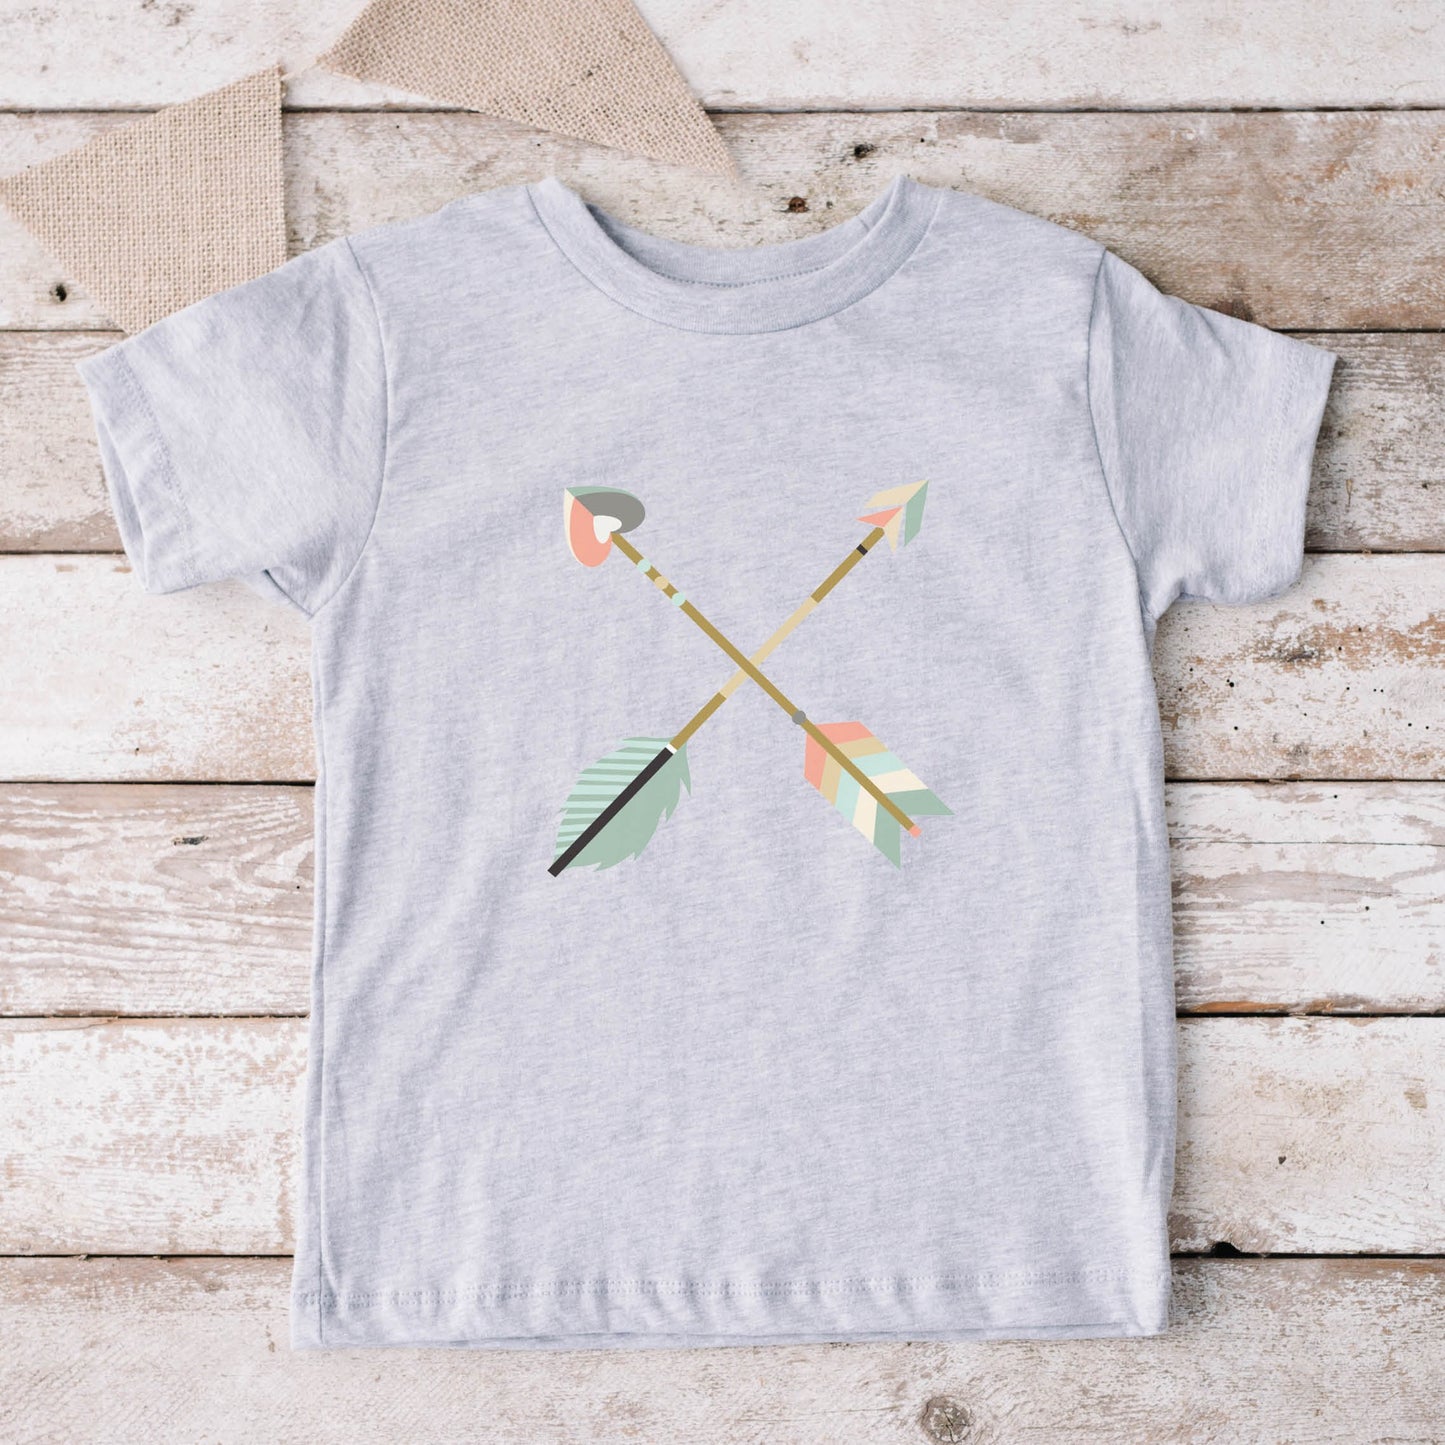 Heather gray toddler size t-shirt with pastel criss-cross boho arrows, one with a heart on the end, matching mommy-and-me Christian Mom "Raising Arrows" Psalm 127:4-5 bible verse t-shirt for boys and girls